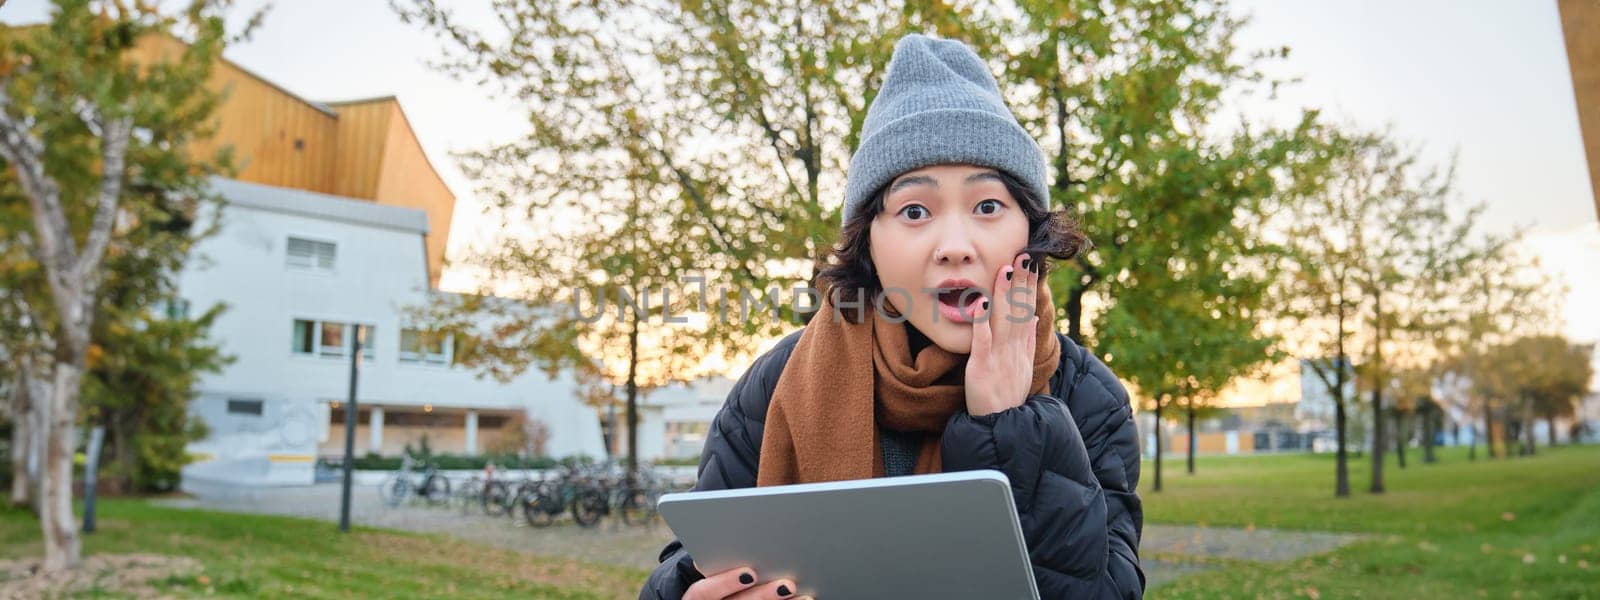 Portrait of asian girl with shocked, surprised face, holds tablet, read or watched big news, looks amazed, sits in park on bench, wears warm clothes.